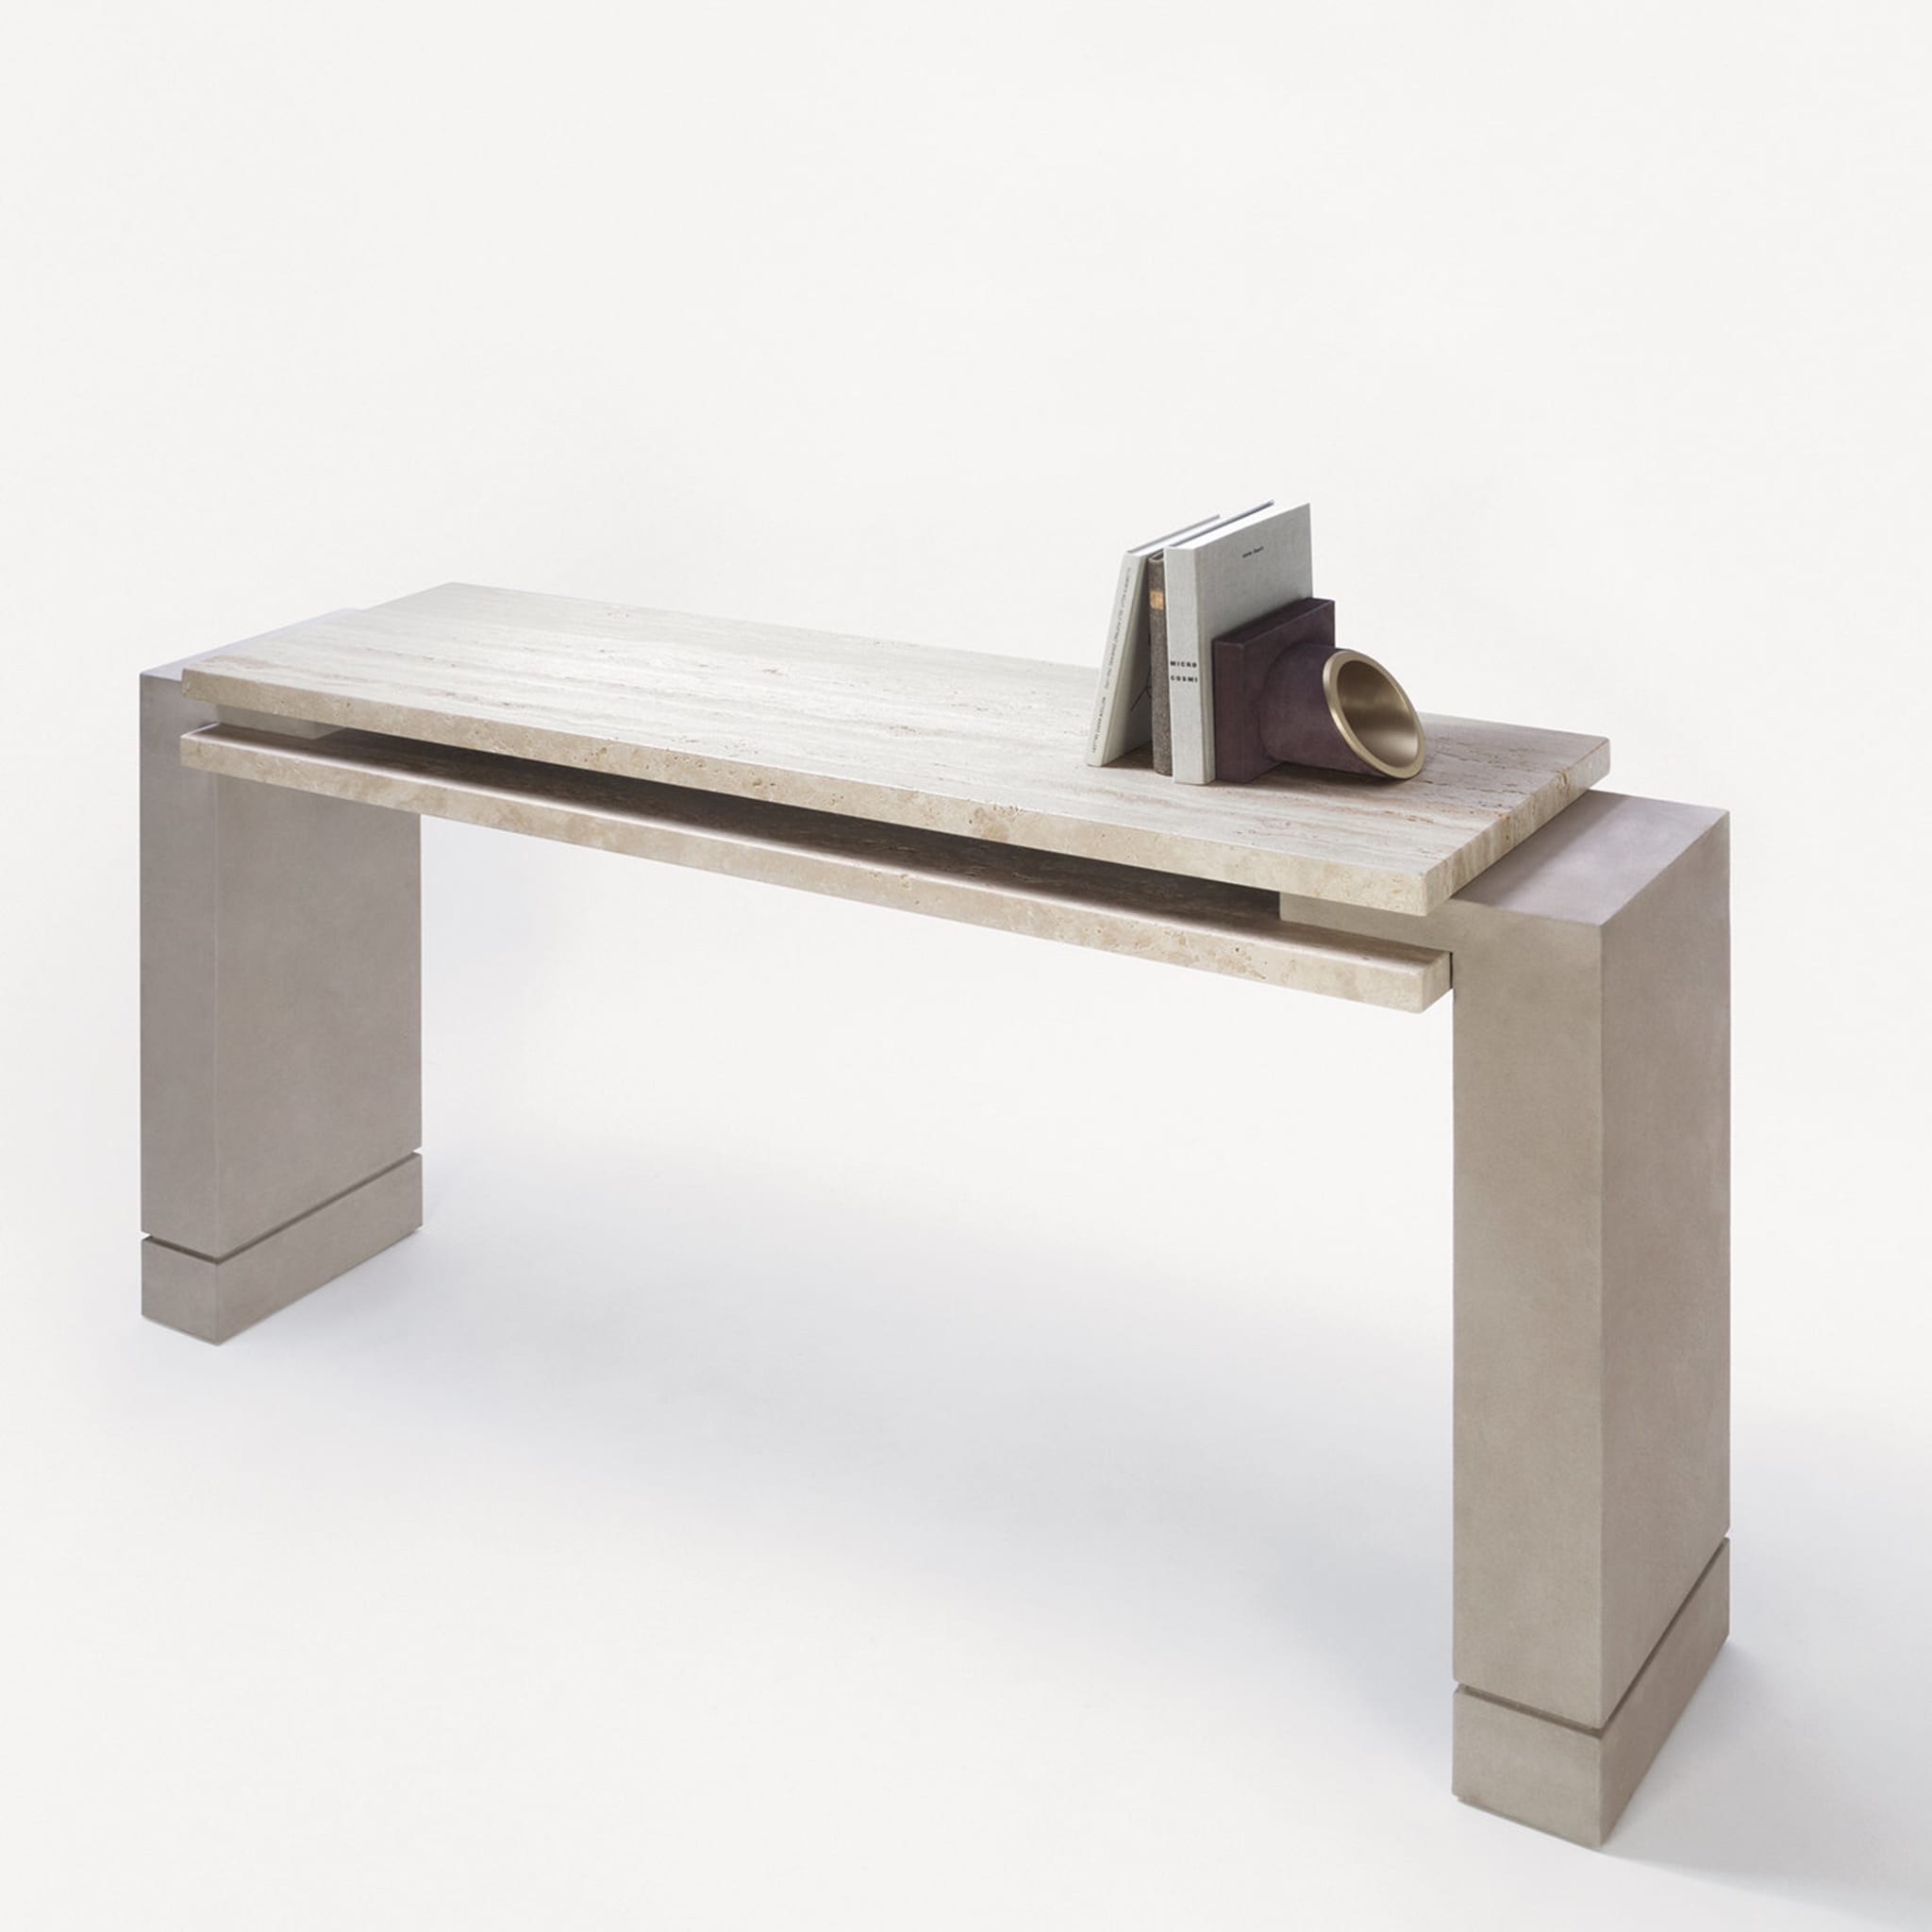 Stratos Leather Console with Travertine Top  - Alternative view 1